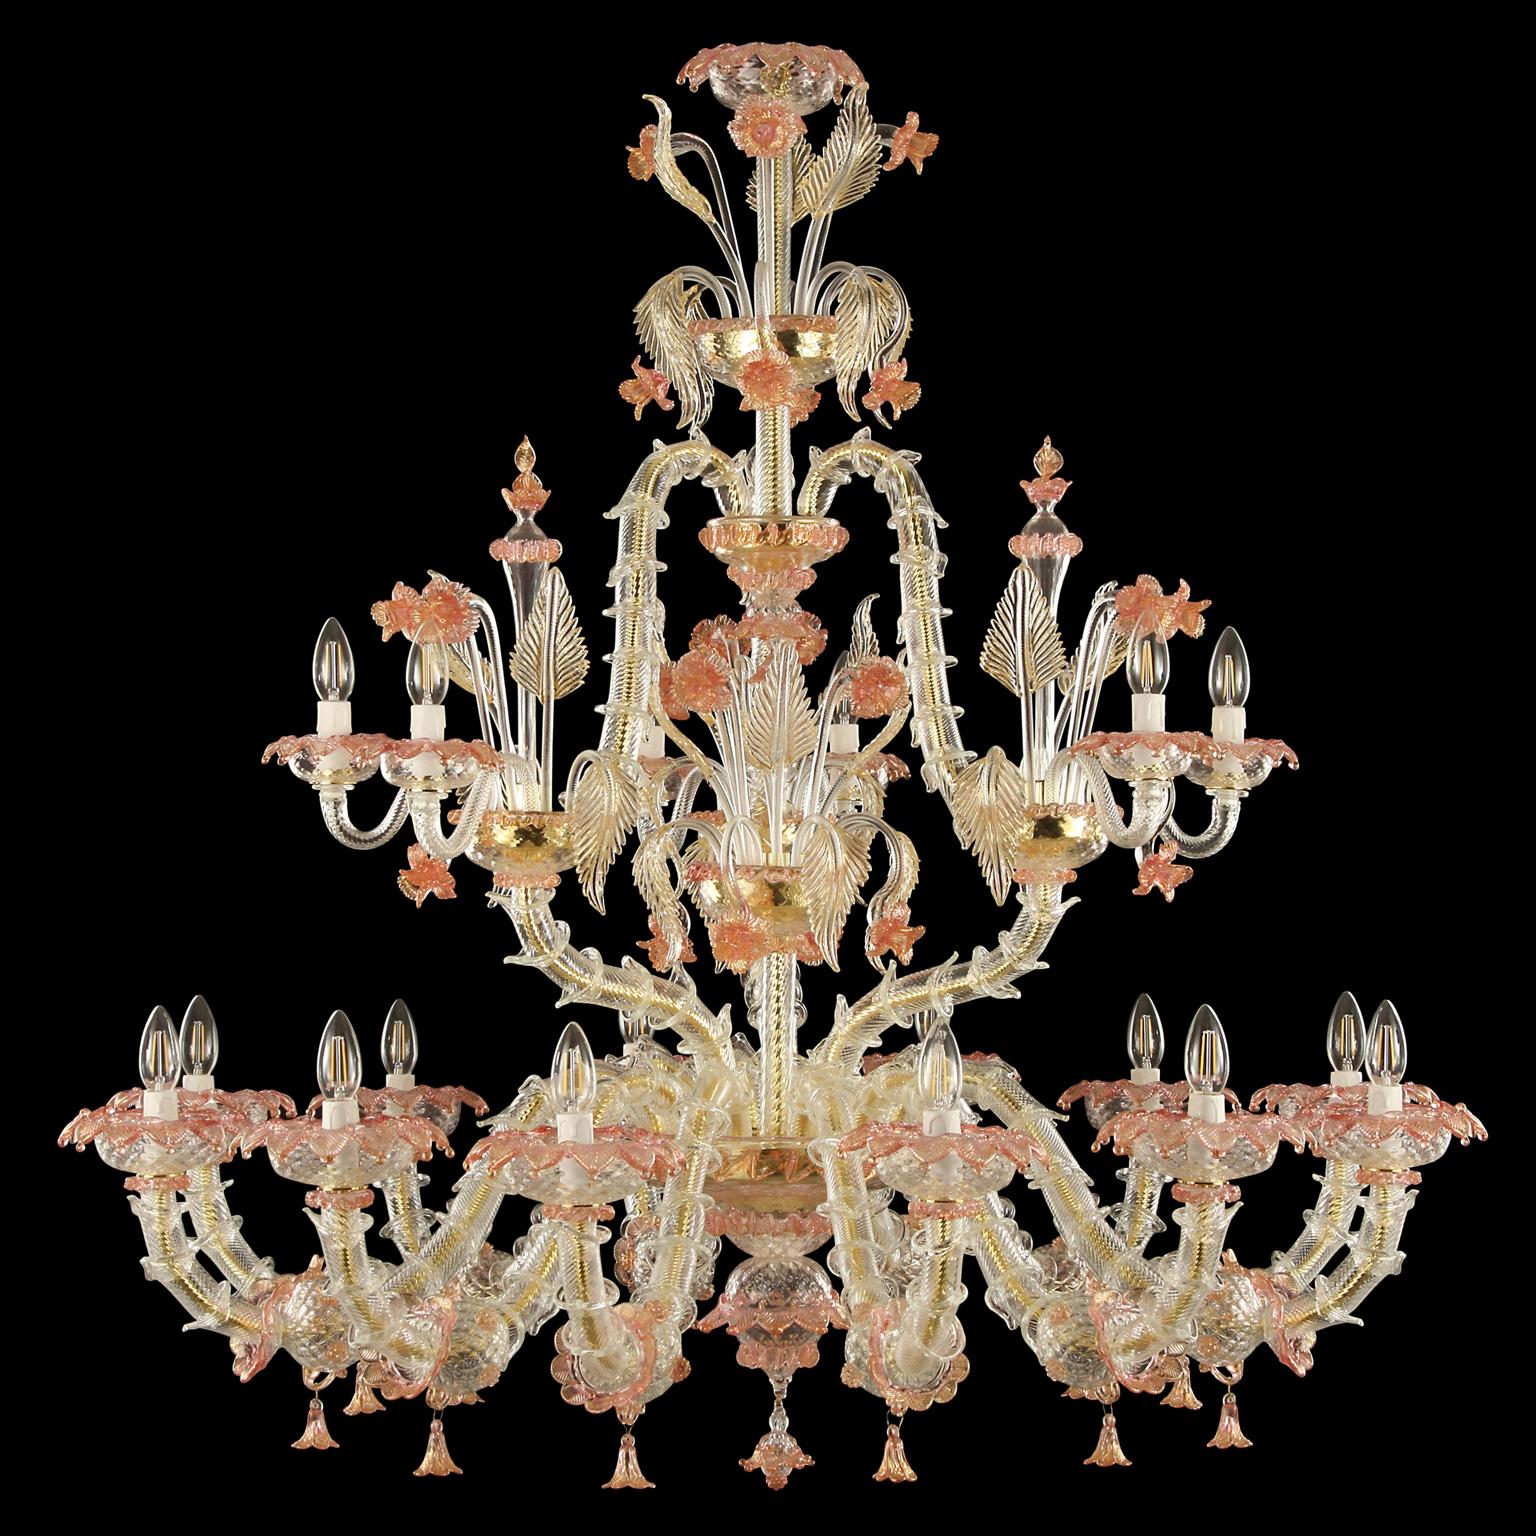 The Murano glass chandelier in Rezzonico style is a romantic lighting work, inspired from the luxurious halls of the Venetian buildings on the Canal Grande.
The colors, the floral decorations, the Rezzonico arms, the pendant elements… all the